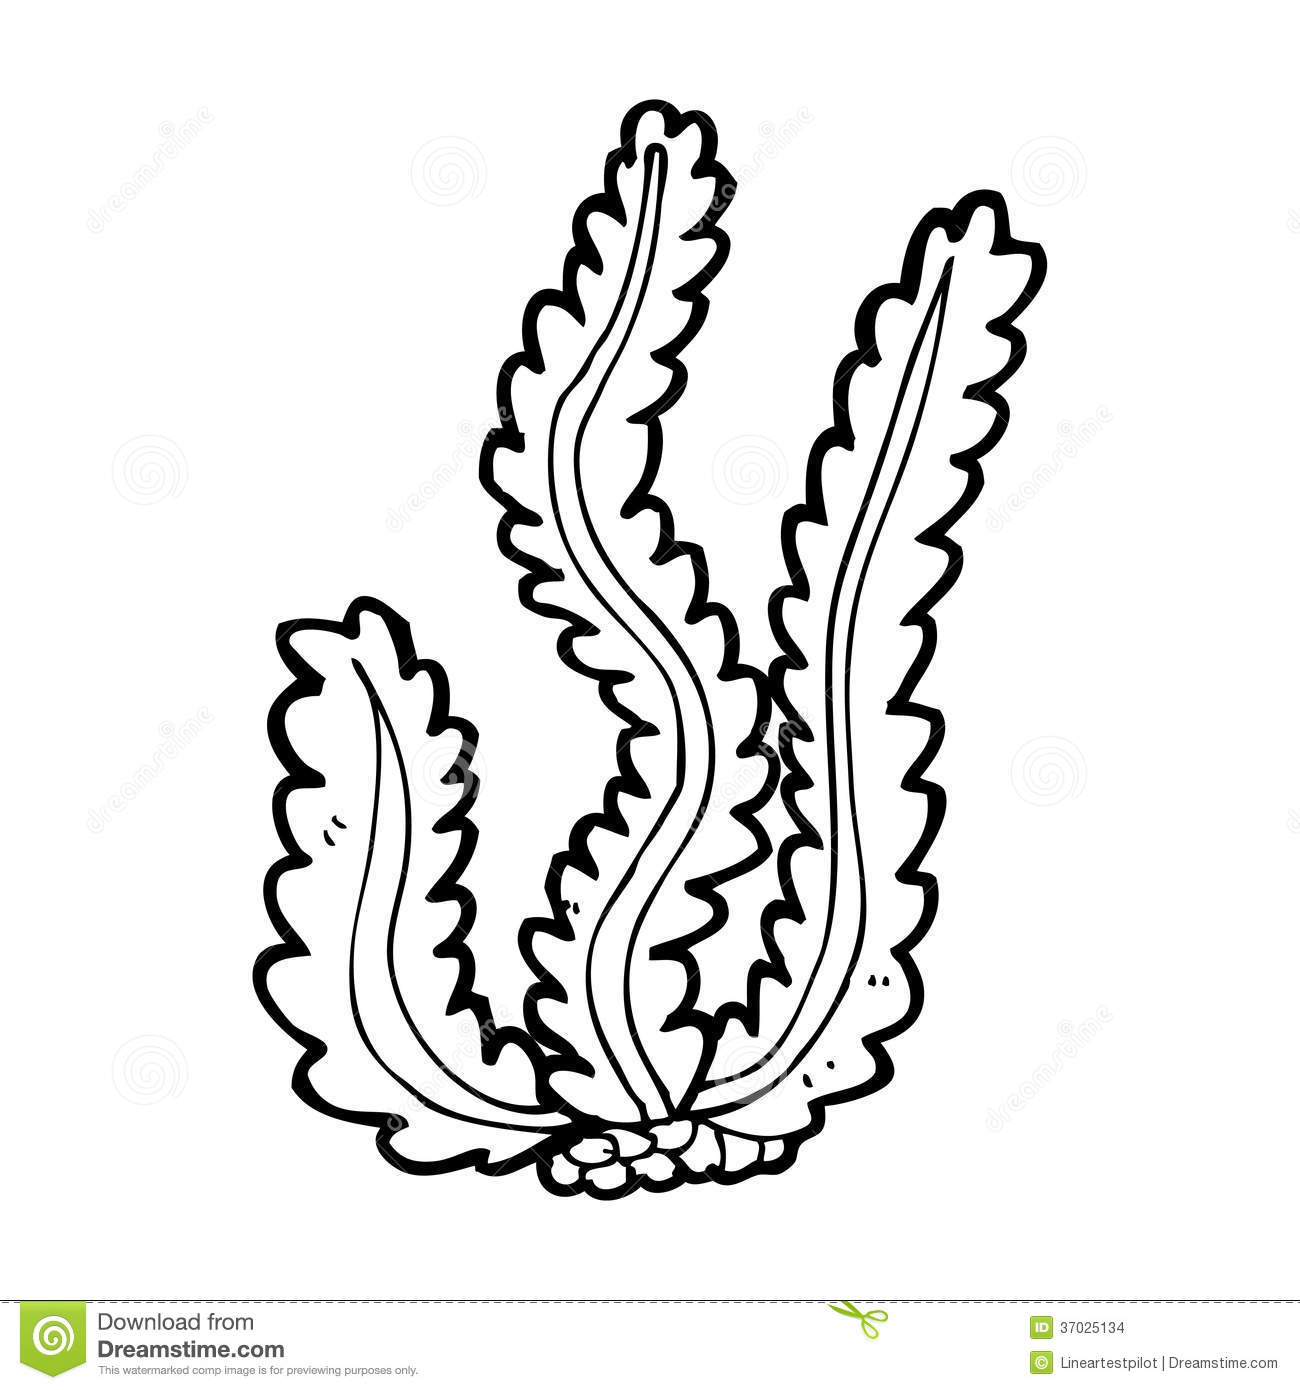 Seaweed Clip Art Black And White Sketch Coloring Page